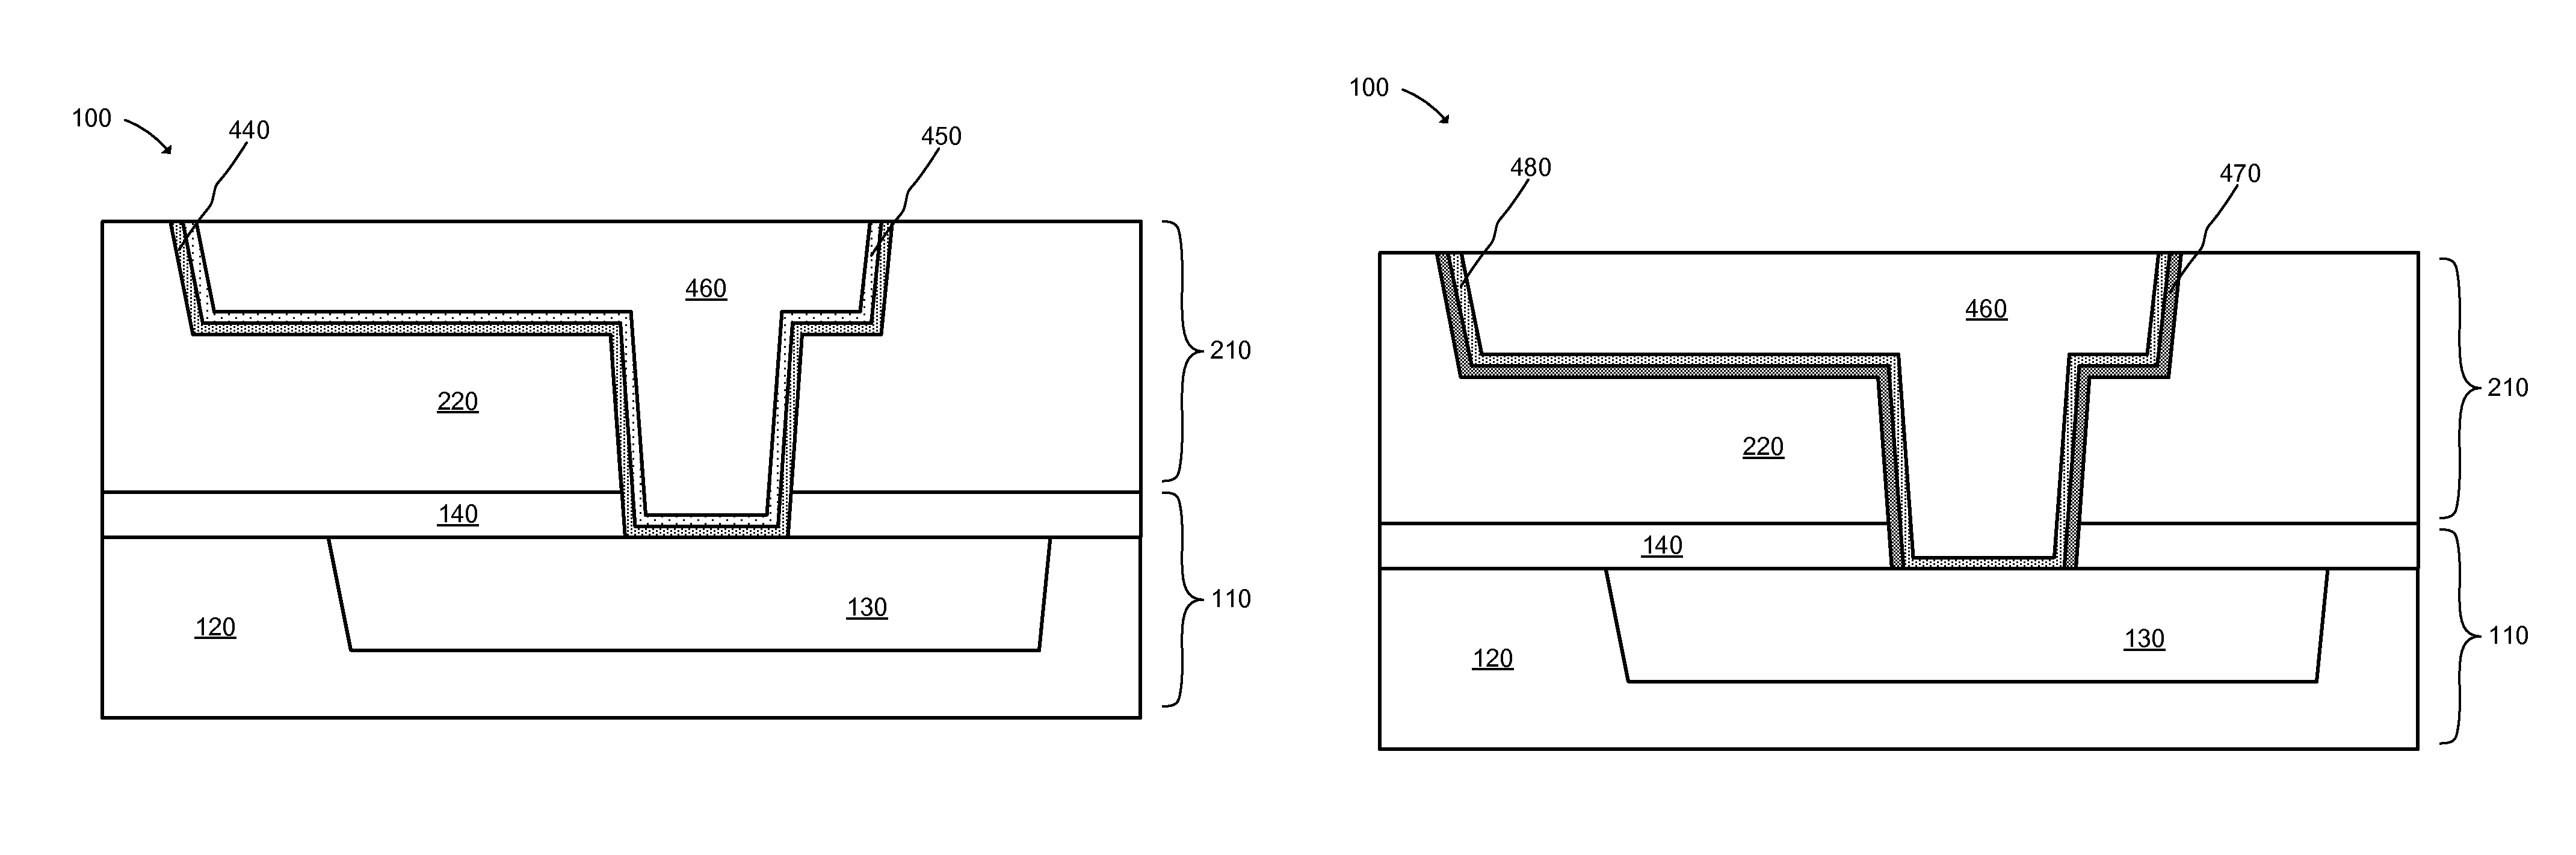 Self-forming embedded diffusion barriers